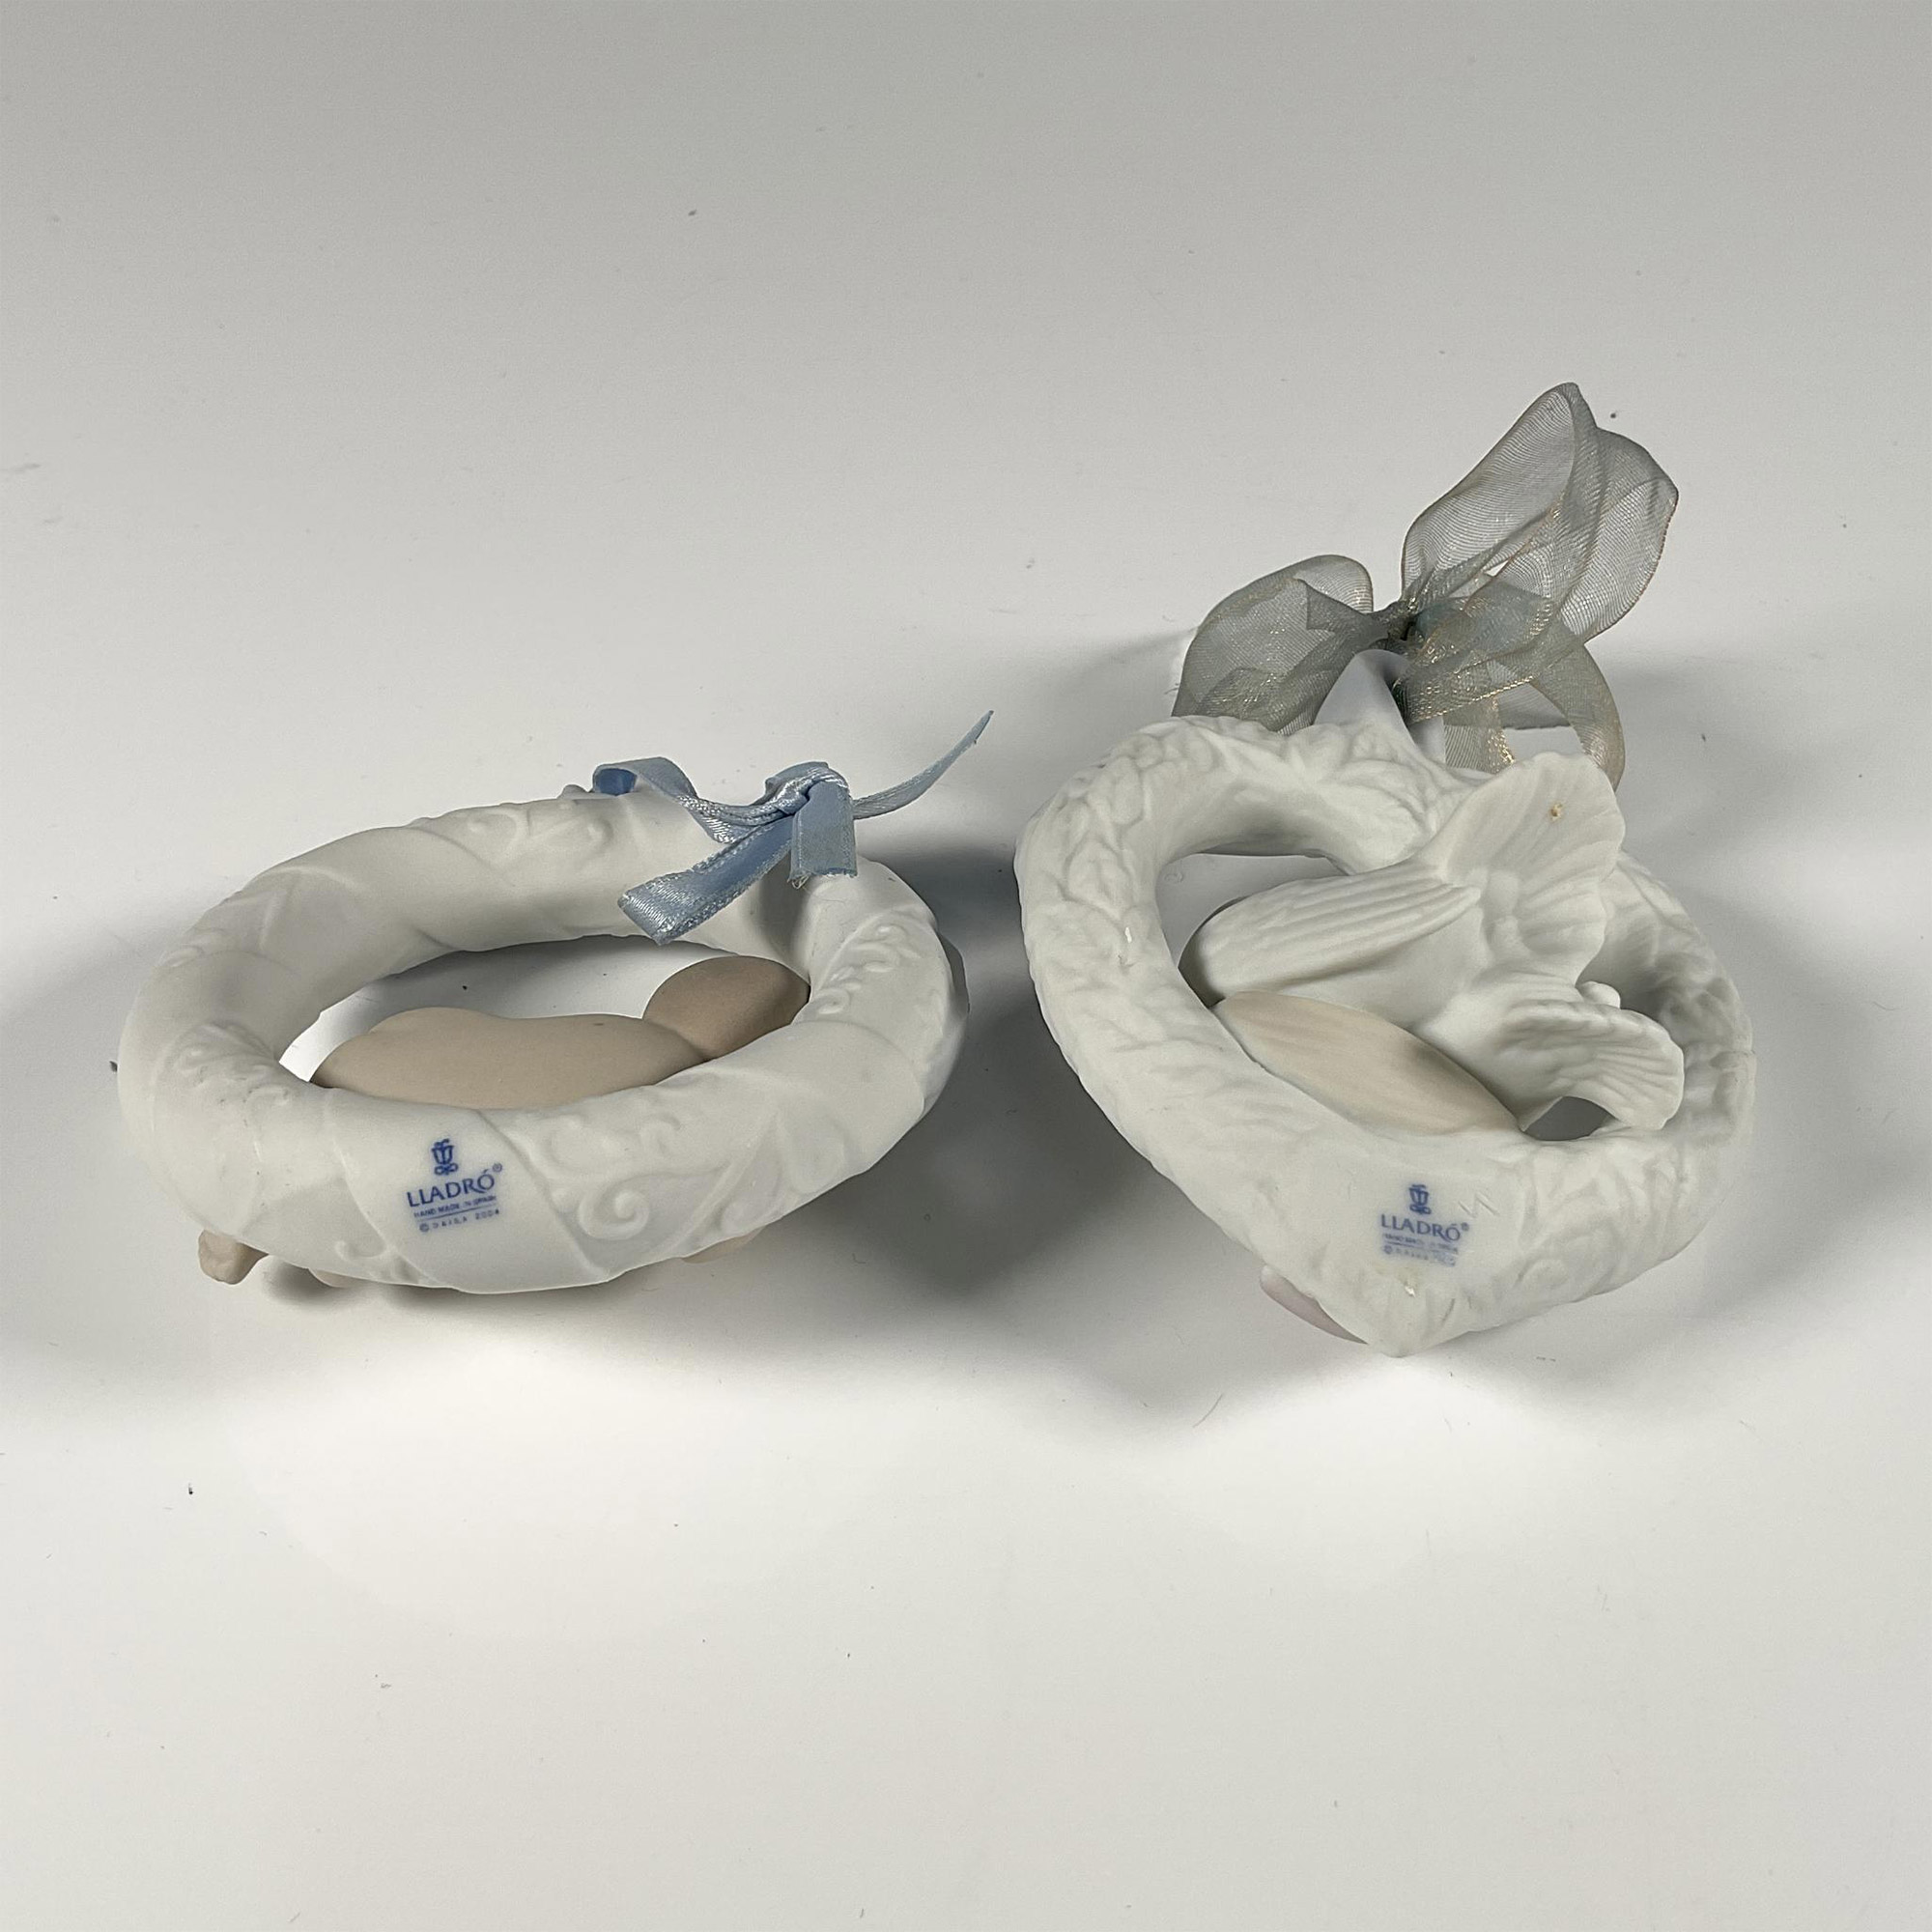 Pair of Lladro Porcelain 2001 and 2005 Christmas Ornaments - Image 3 of 3